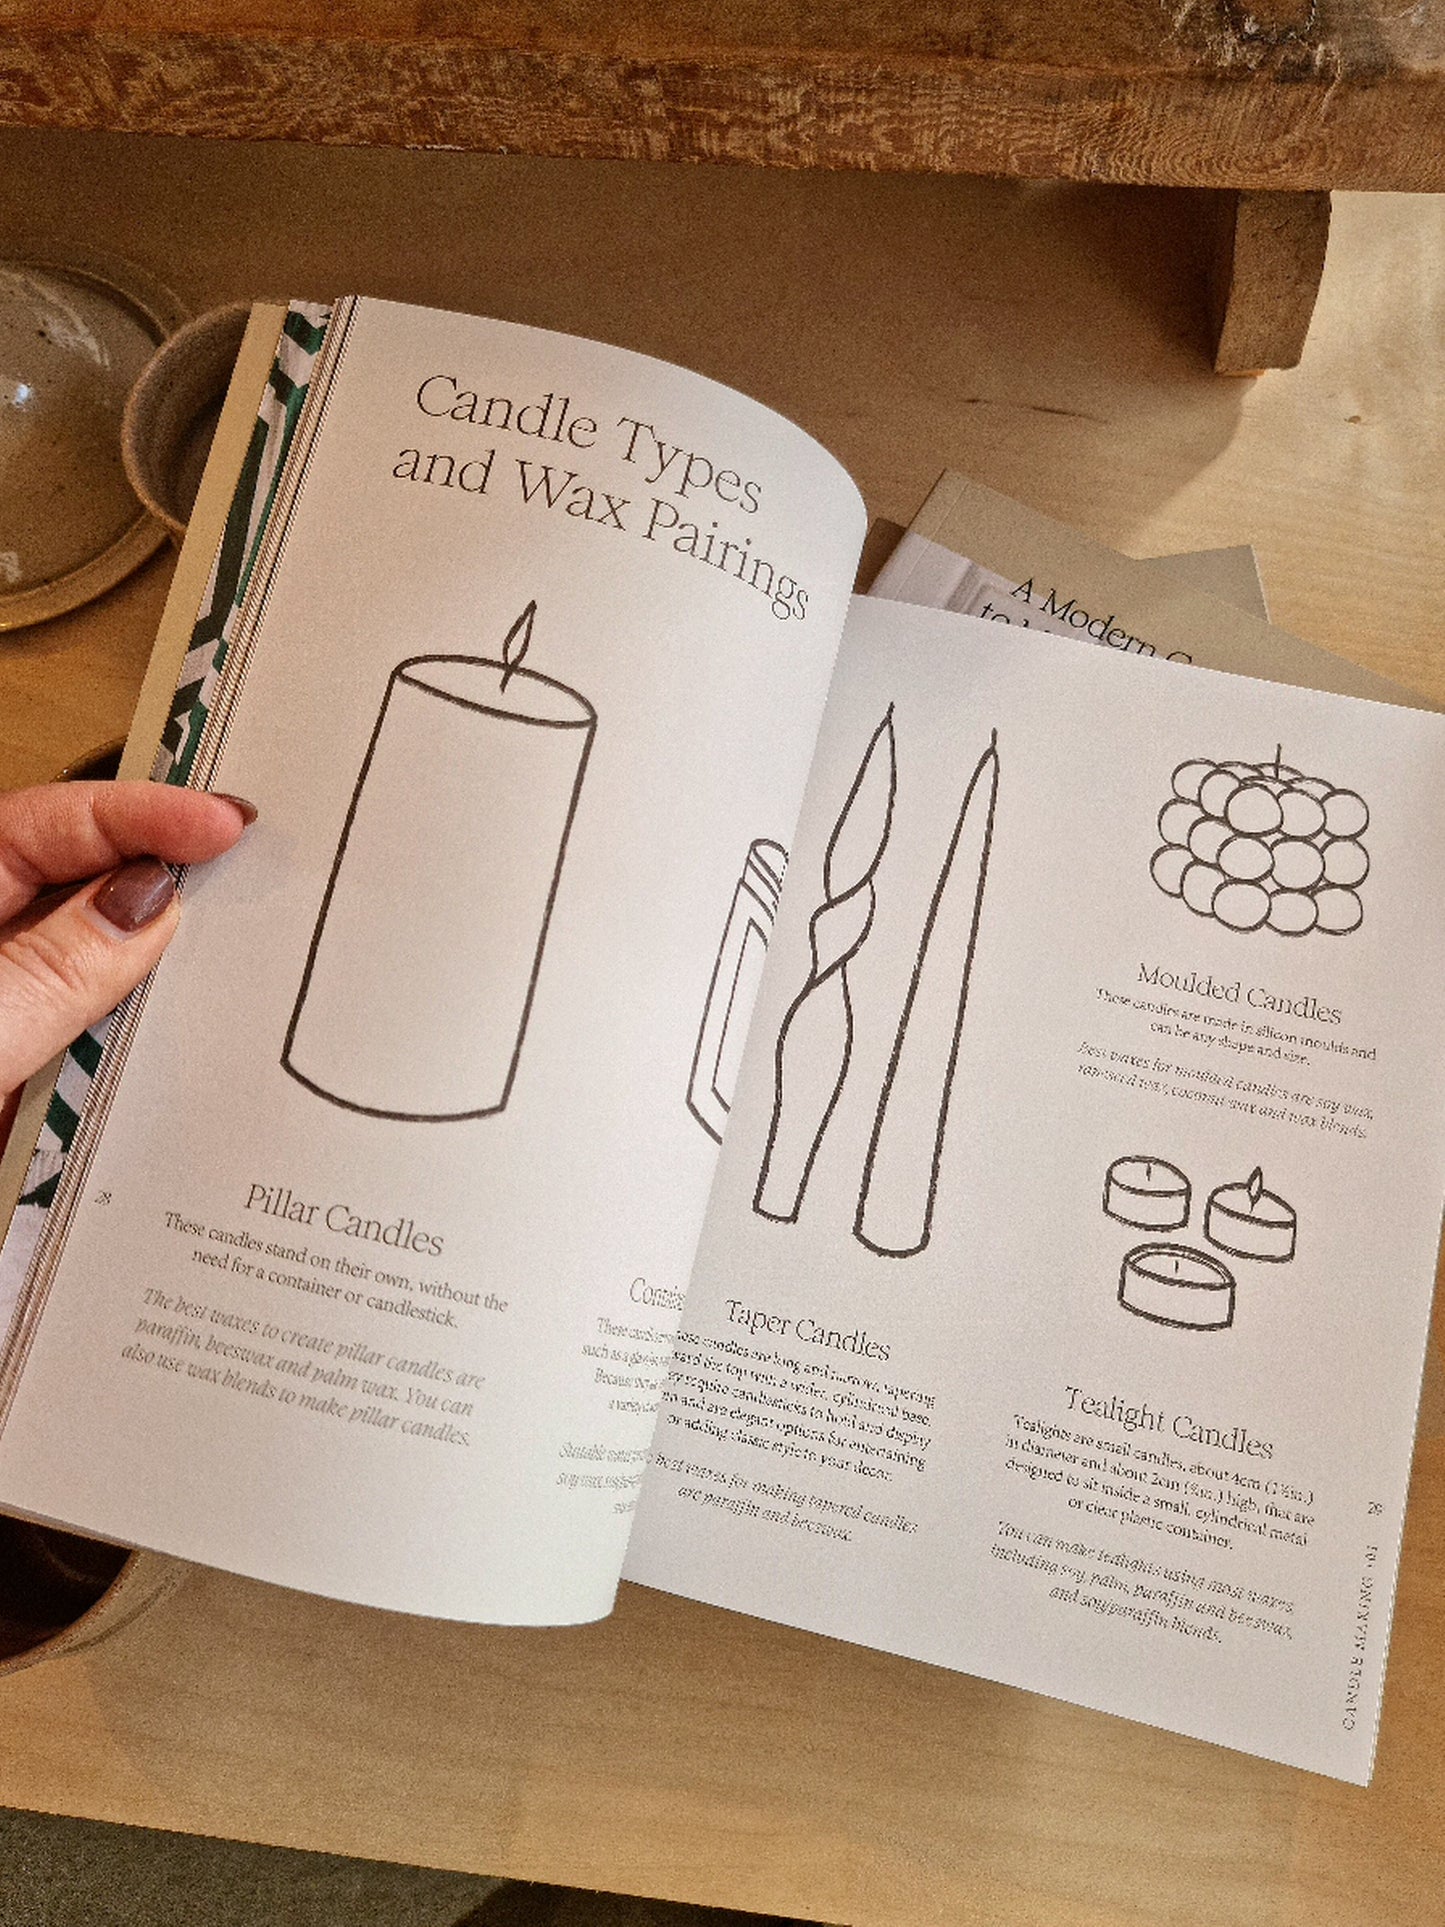 Candles | A Modern Guide to Making Candles